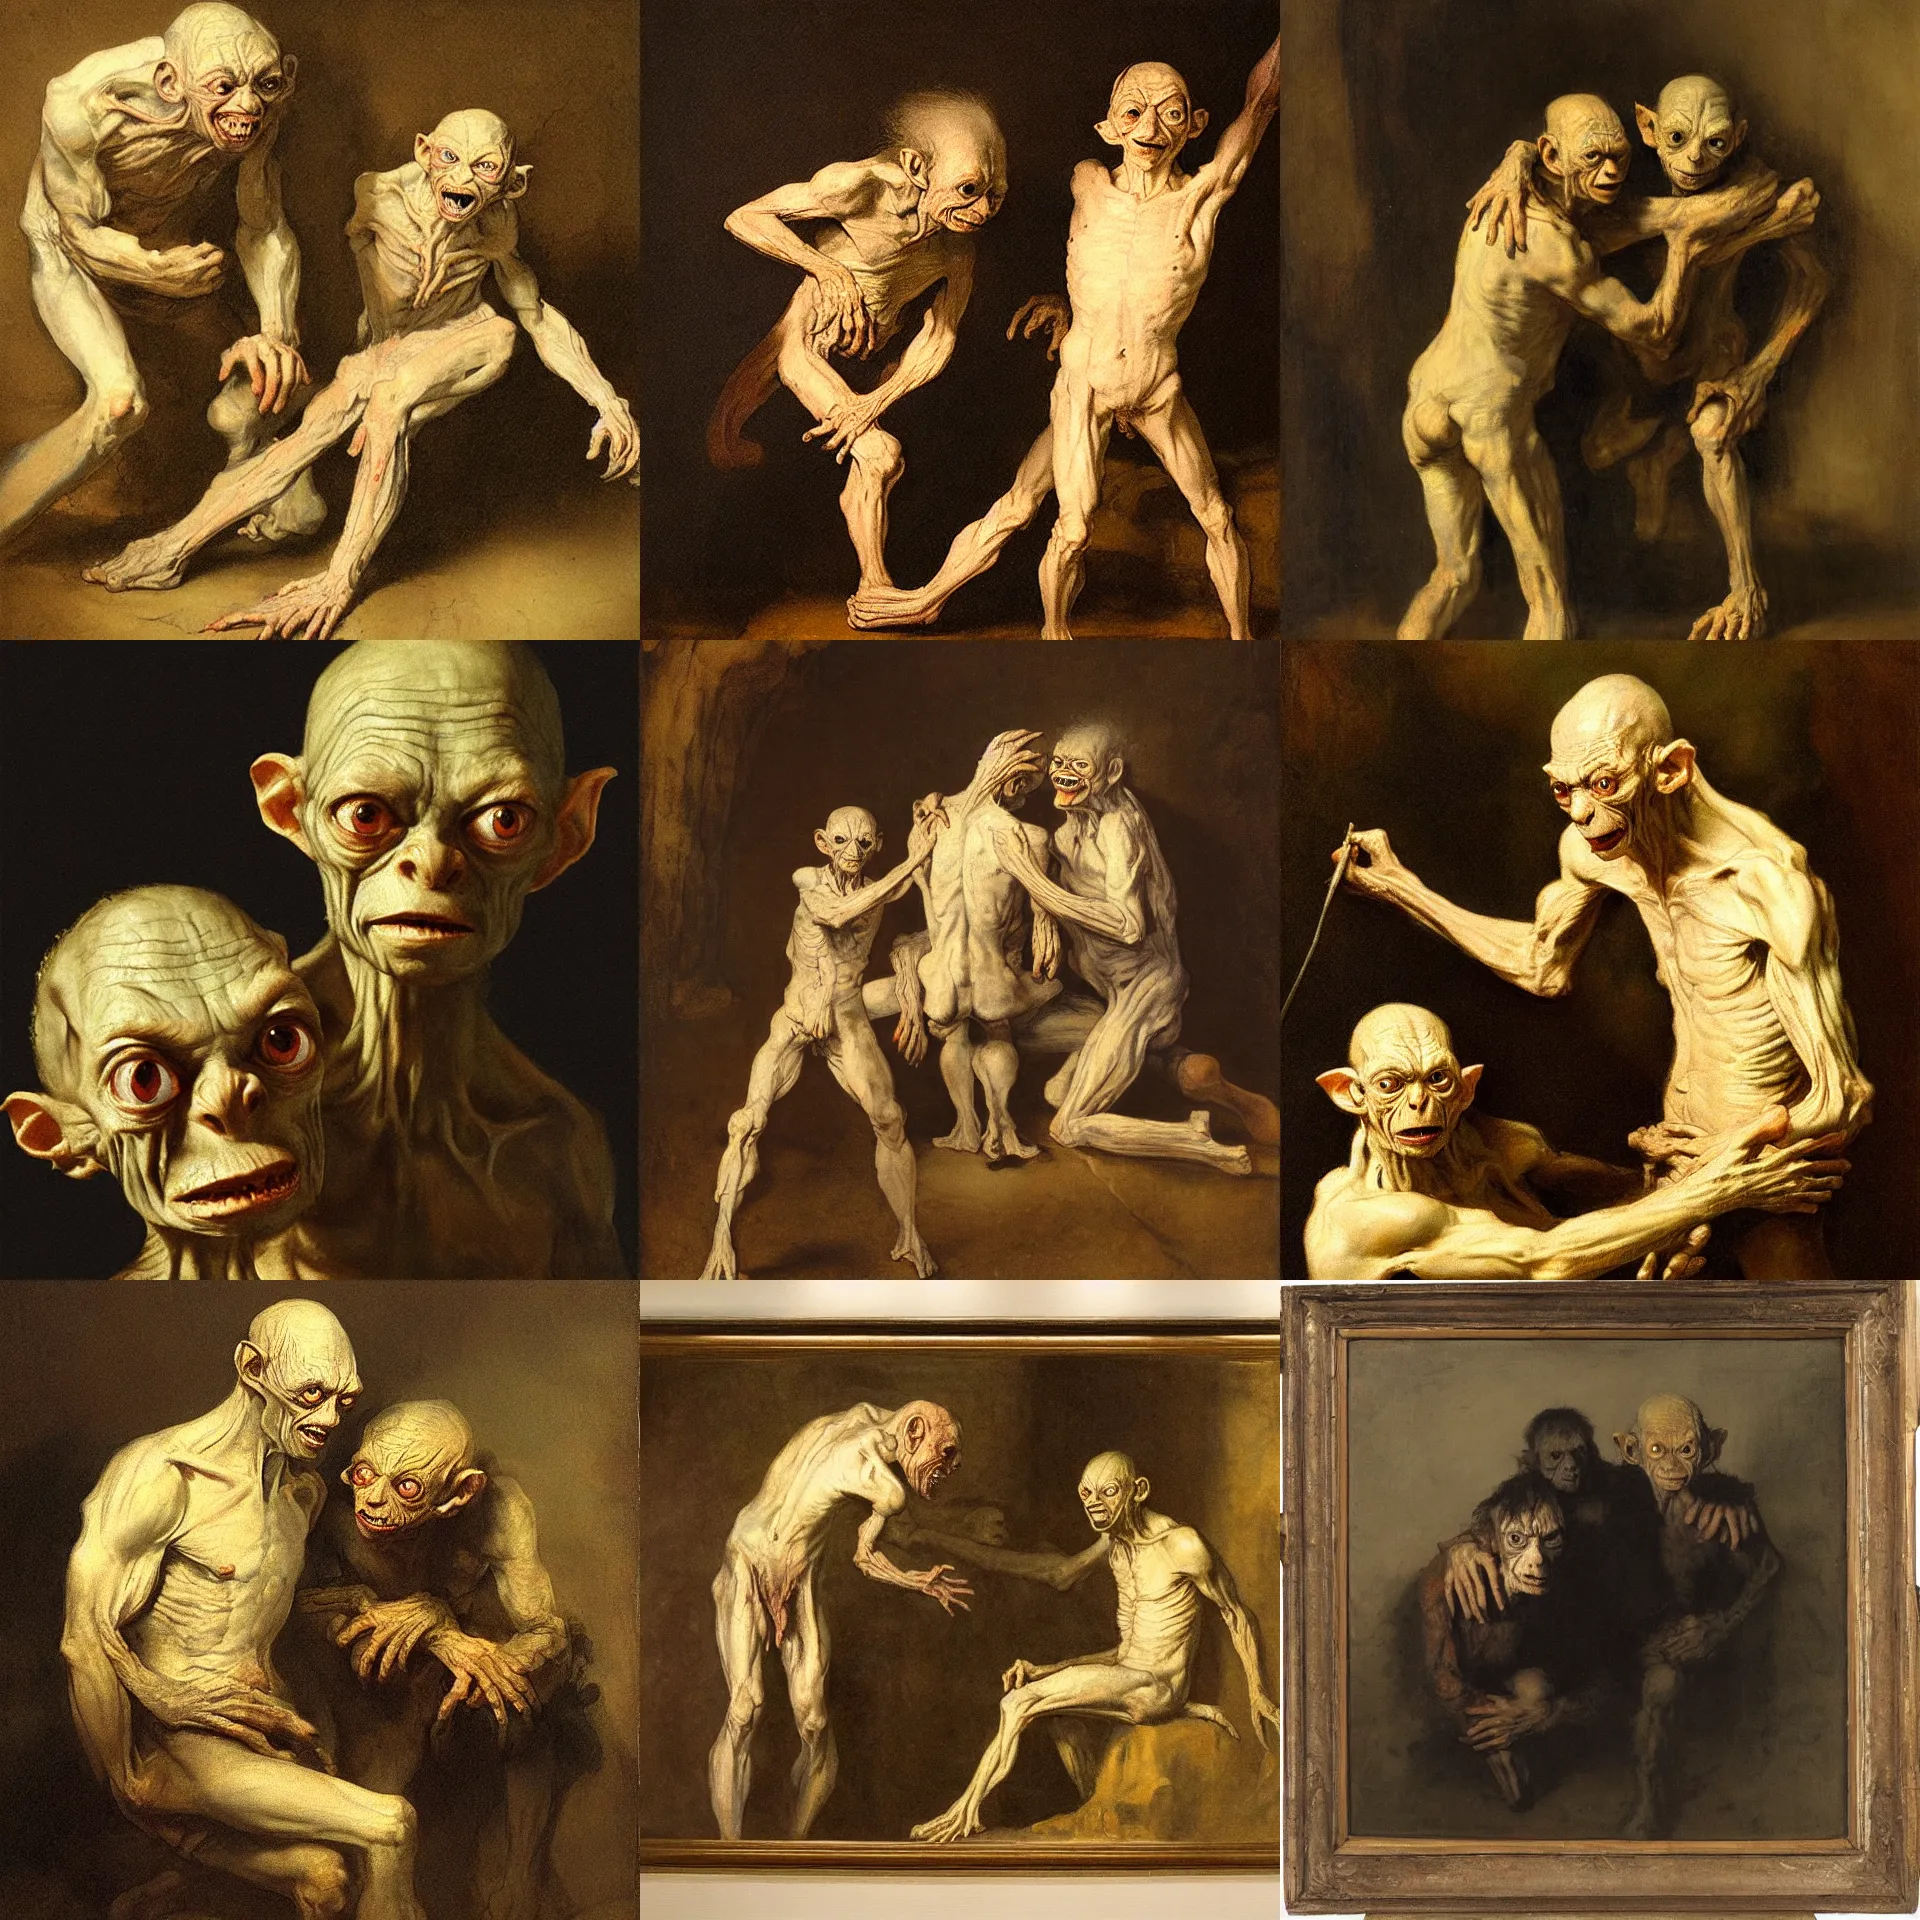 Prompt: a portrait of gollum and smeagle in the same room painted by rembrandt